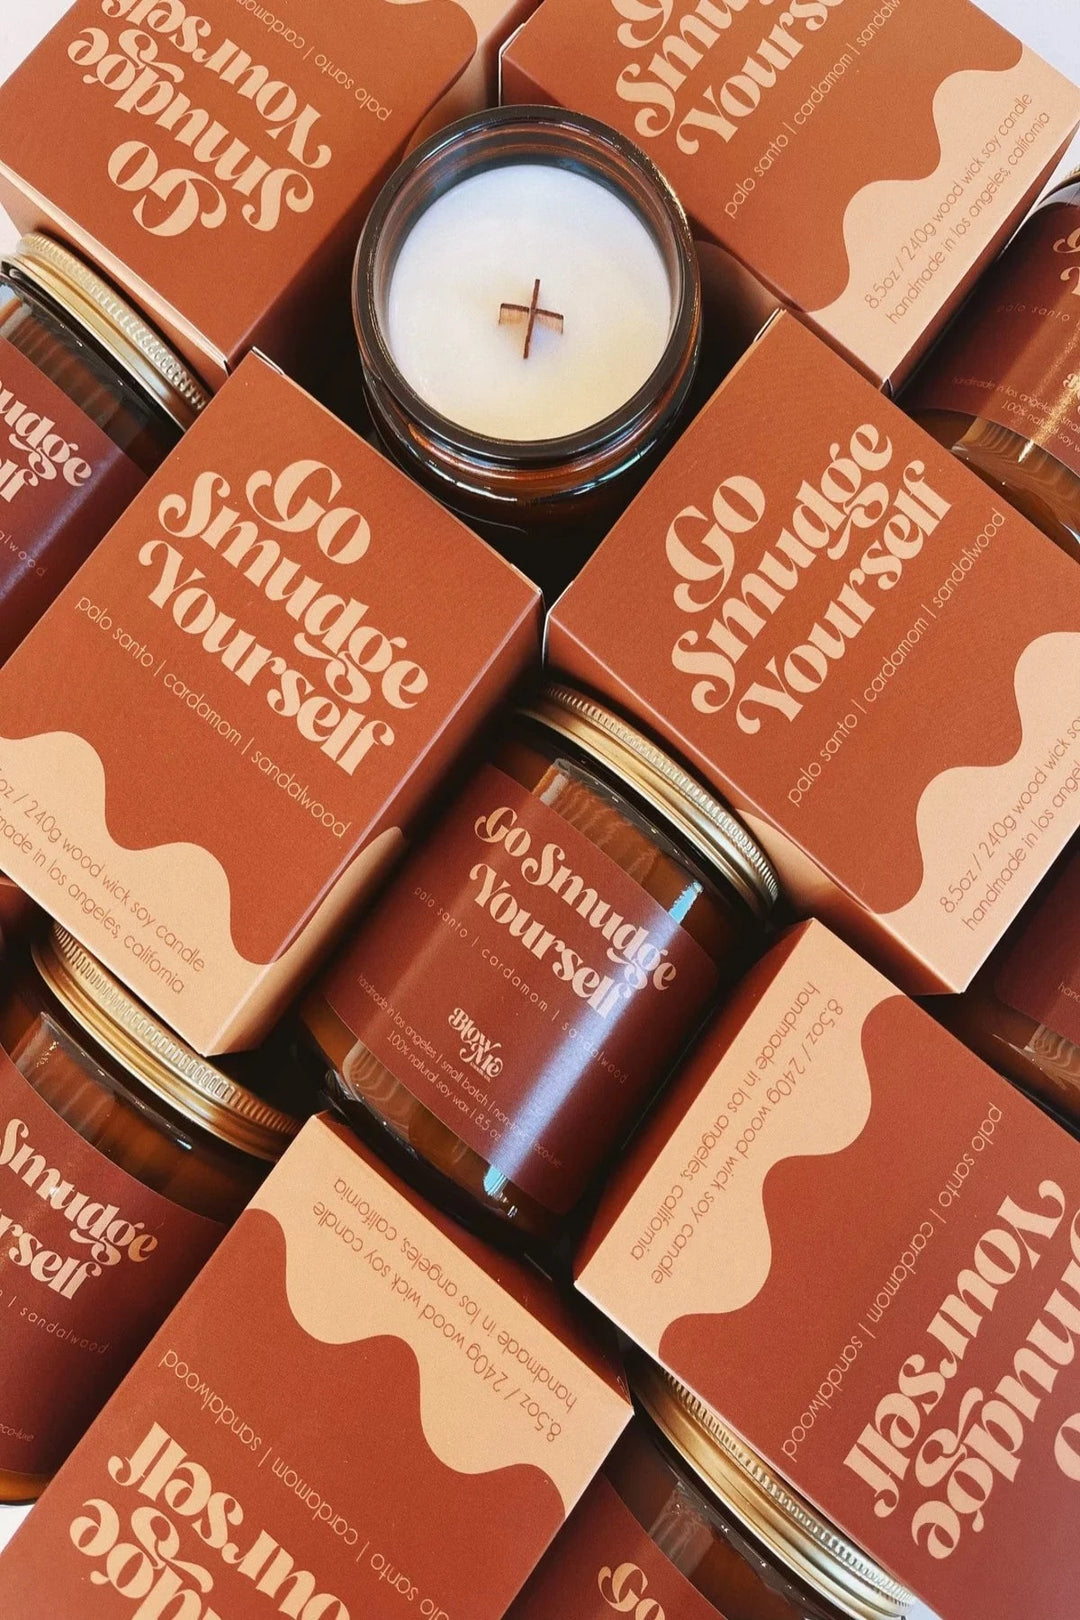 Go Smudge Yourself Soy Candle - 8.5 Oz